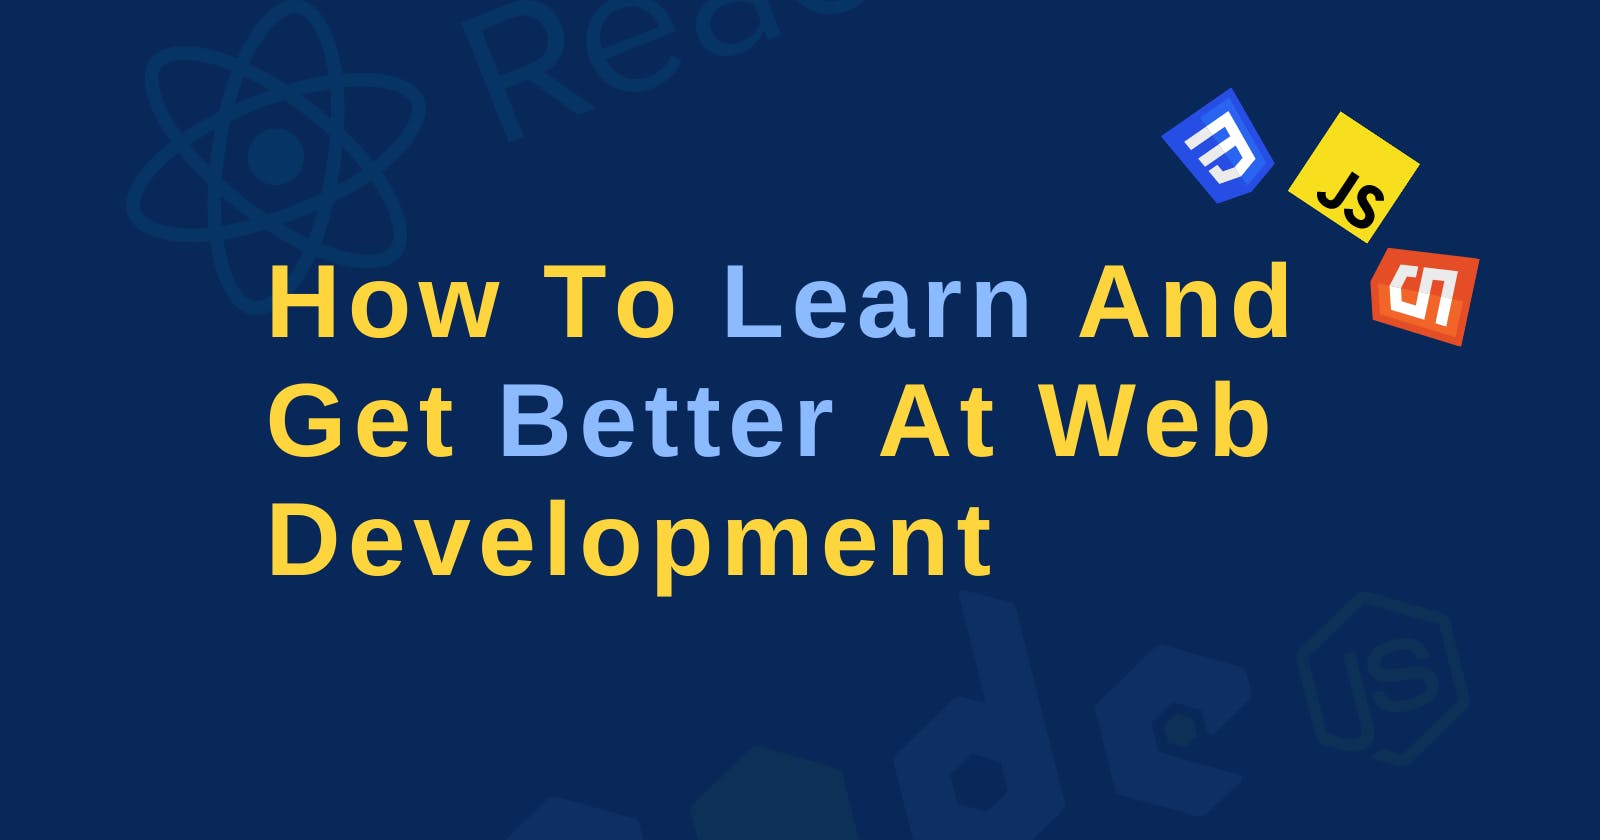 How To Learn And Get Better At Web Development